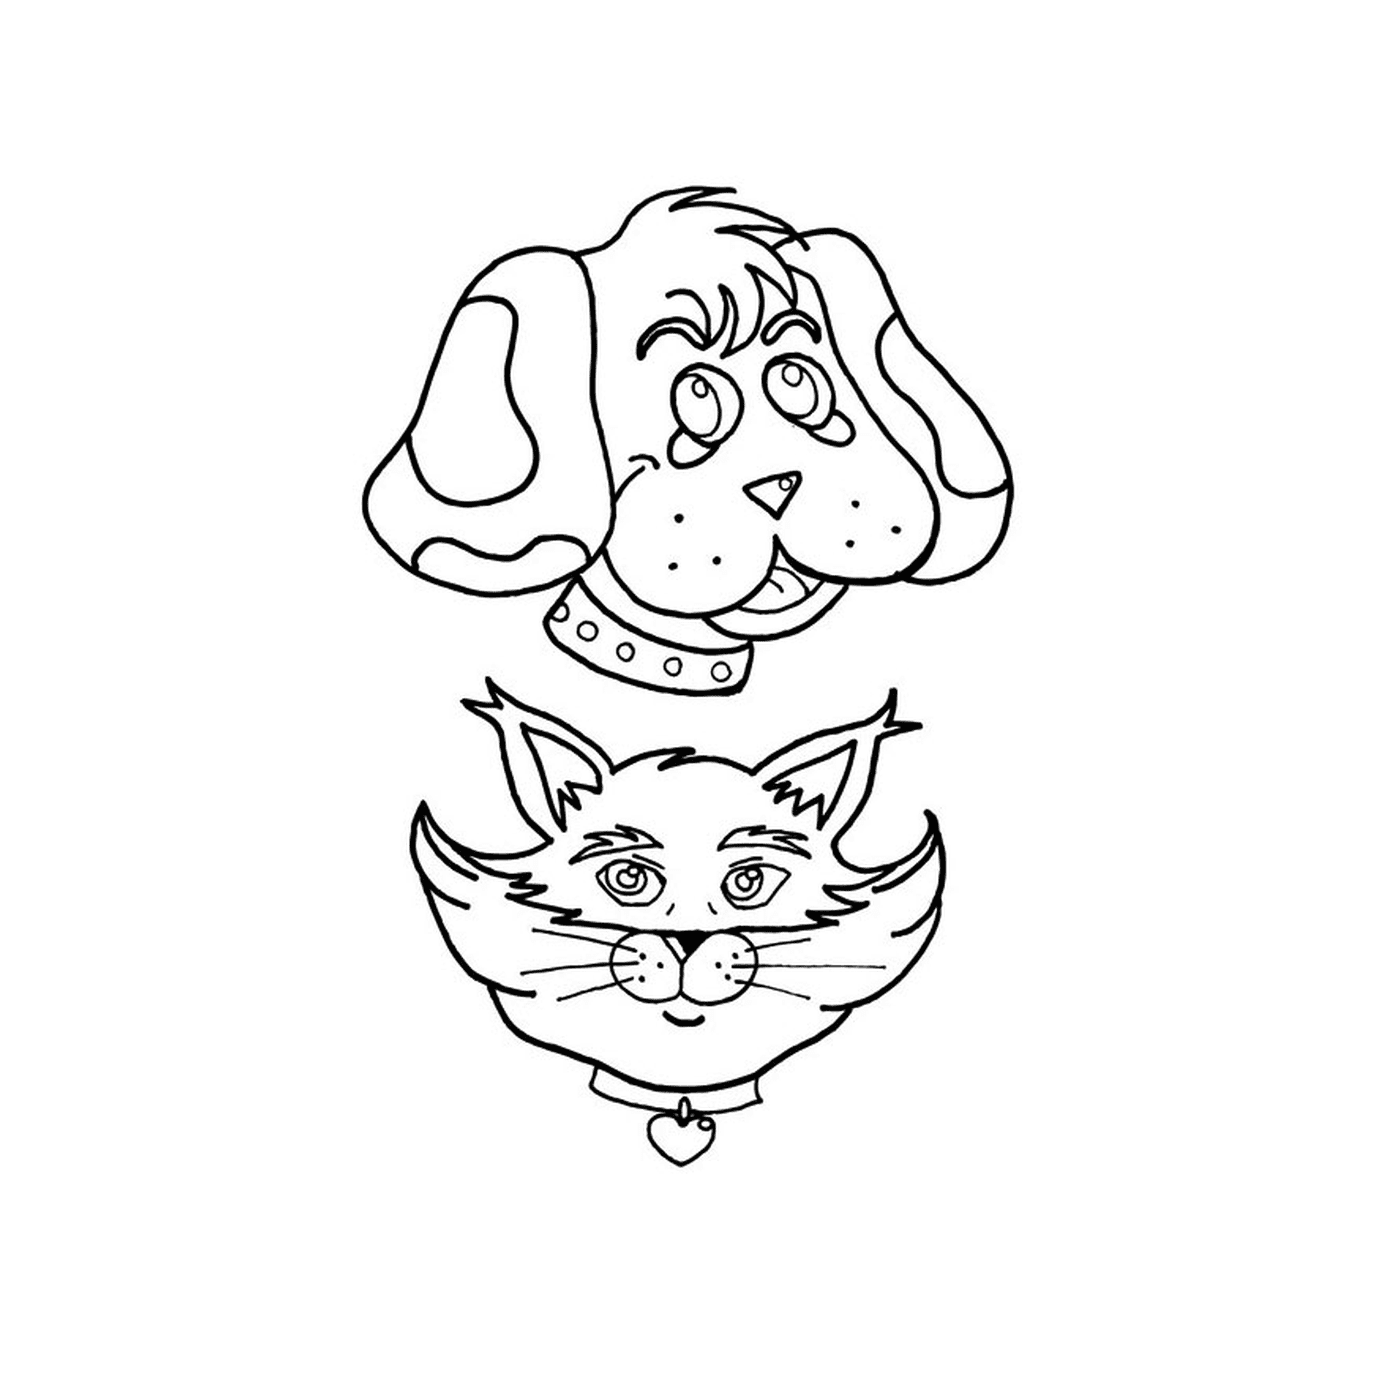  A dog and a cat drawn together 